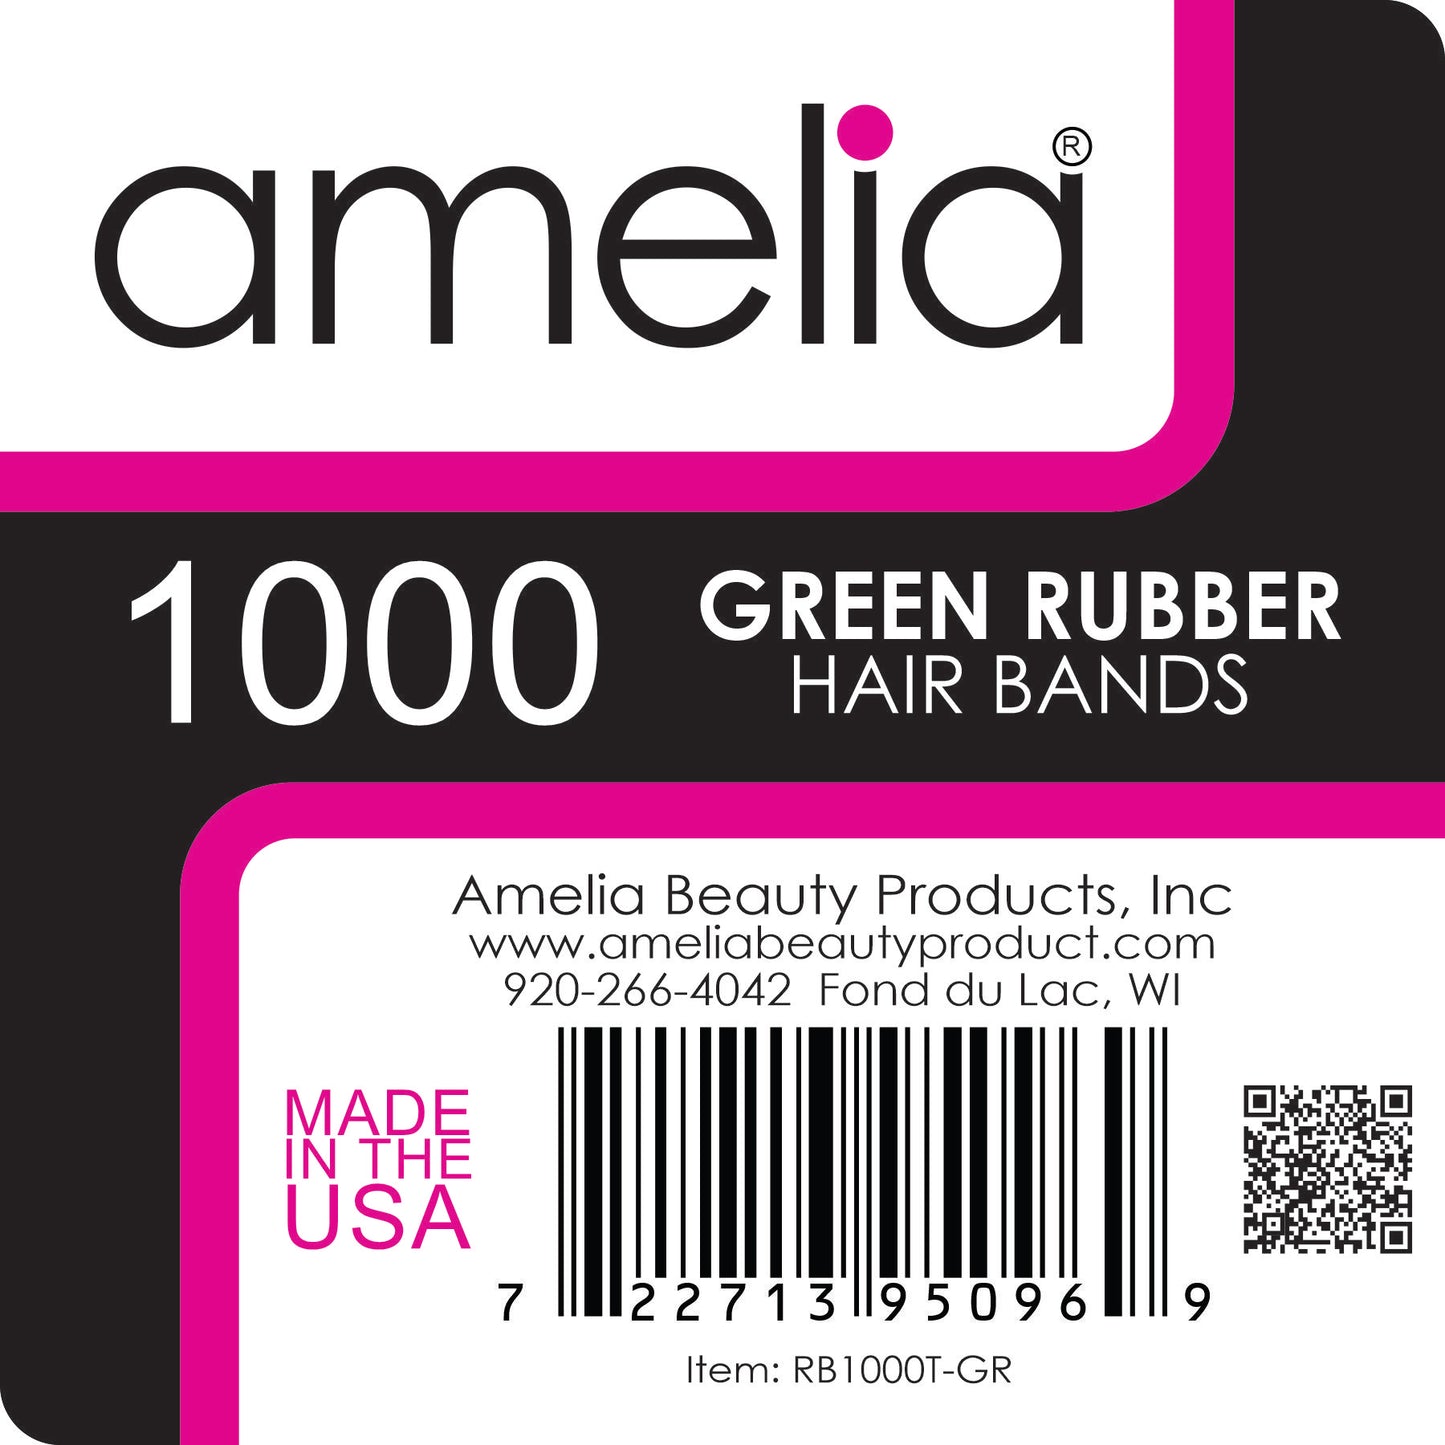 Amelia Beauty | 1/2in, Green, Elastic Rubber Band Pony Tail Holders | Made in USA, Ideal for Ponytails, Braids, Twists, Dreadlocks, Styling Accessories for Women, Men and Girls | 1000 Pack